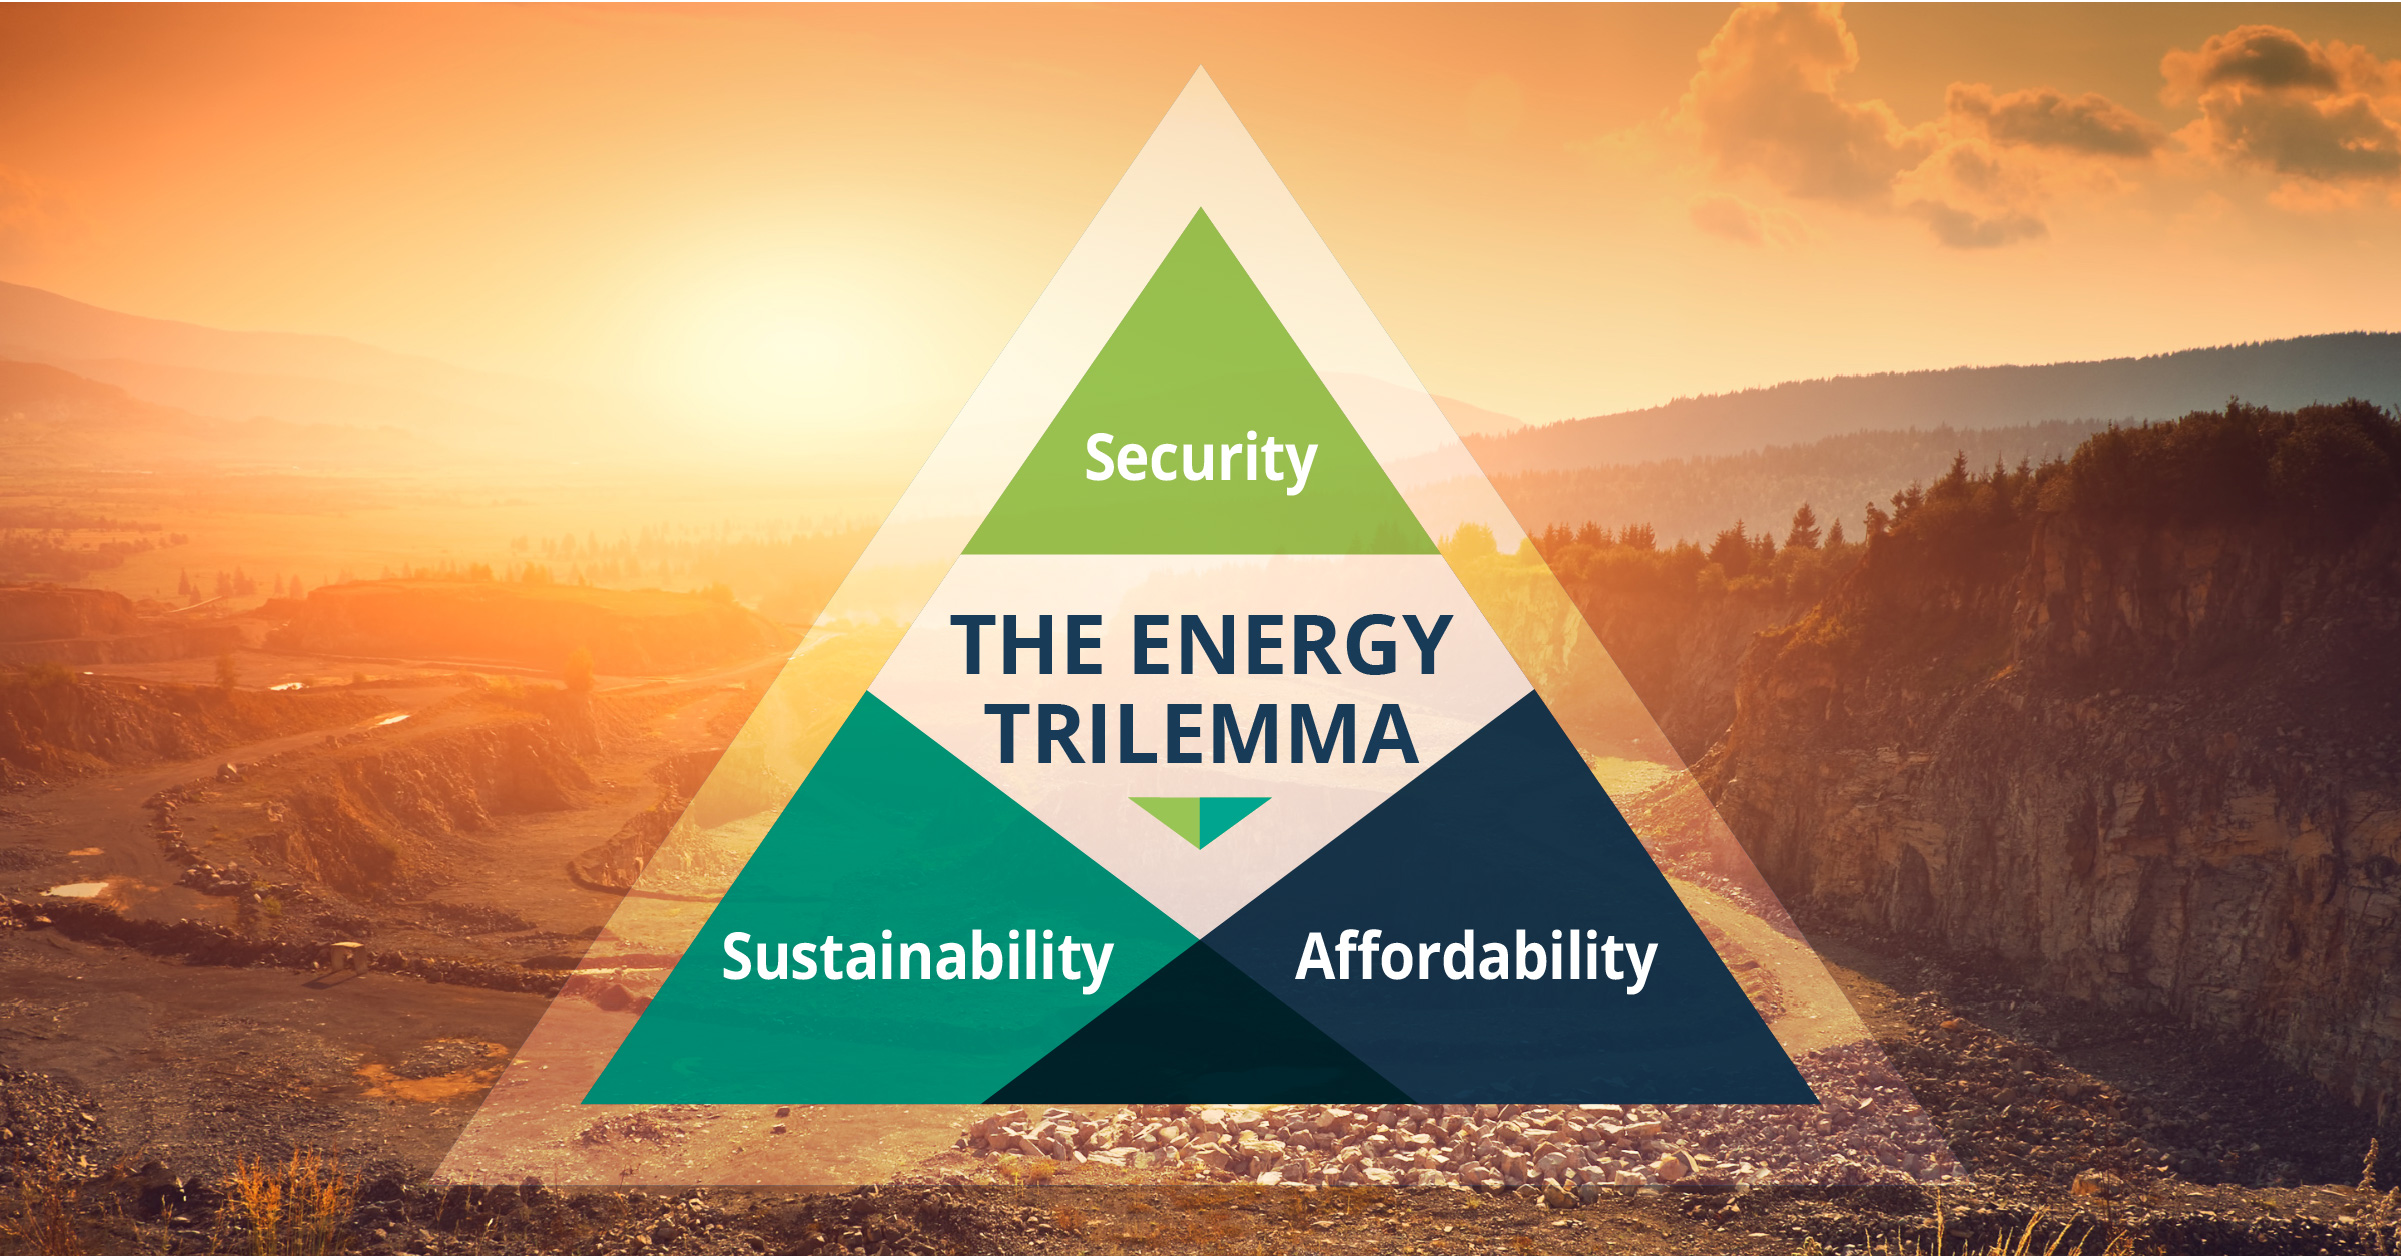 Balancing the Energy Trilemma of Security, Sustainability, and Affordability with Locus Mining and CeraWEEK